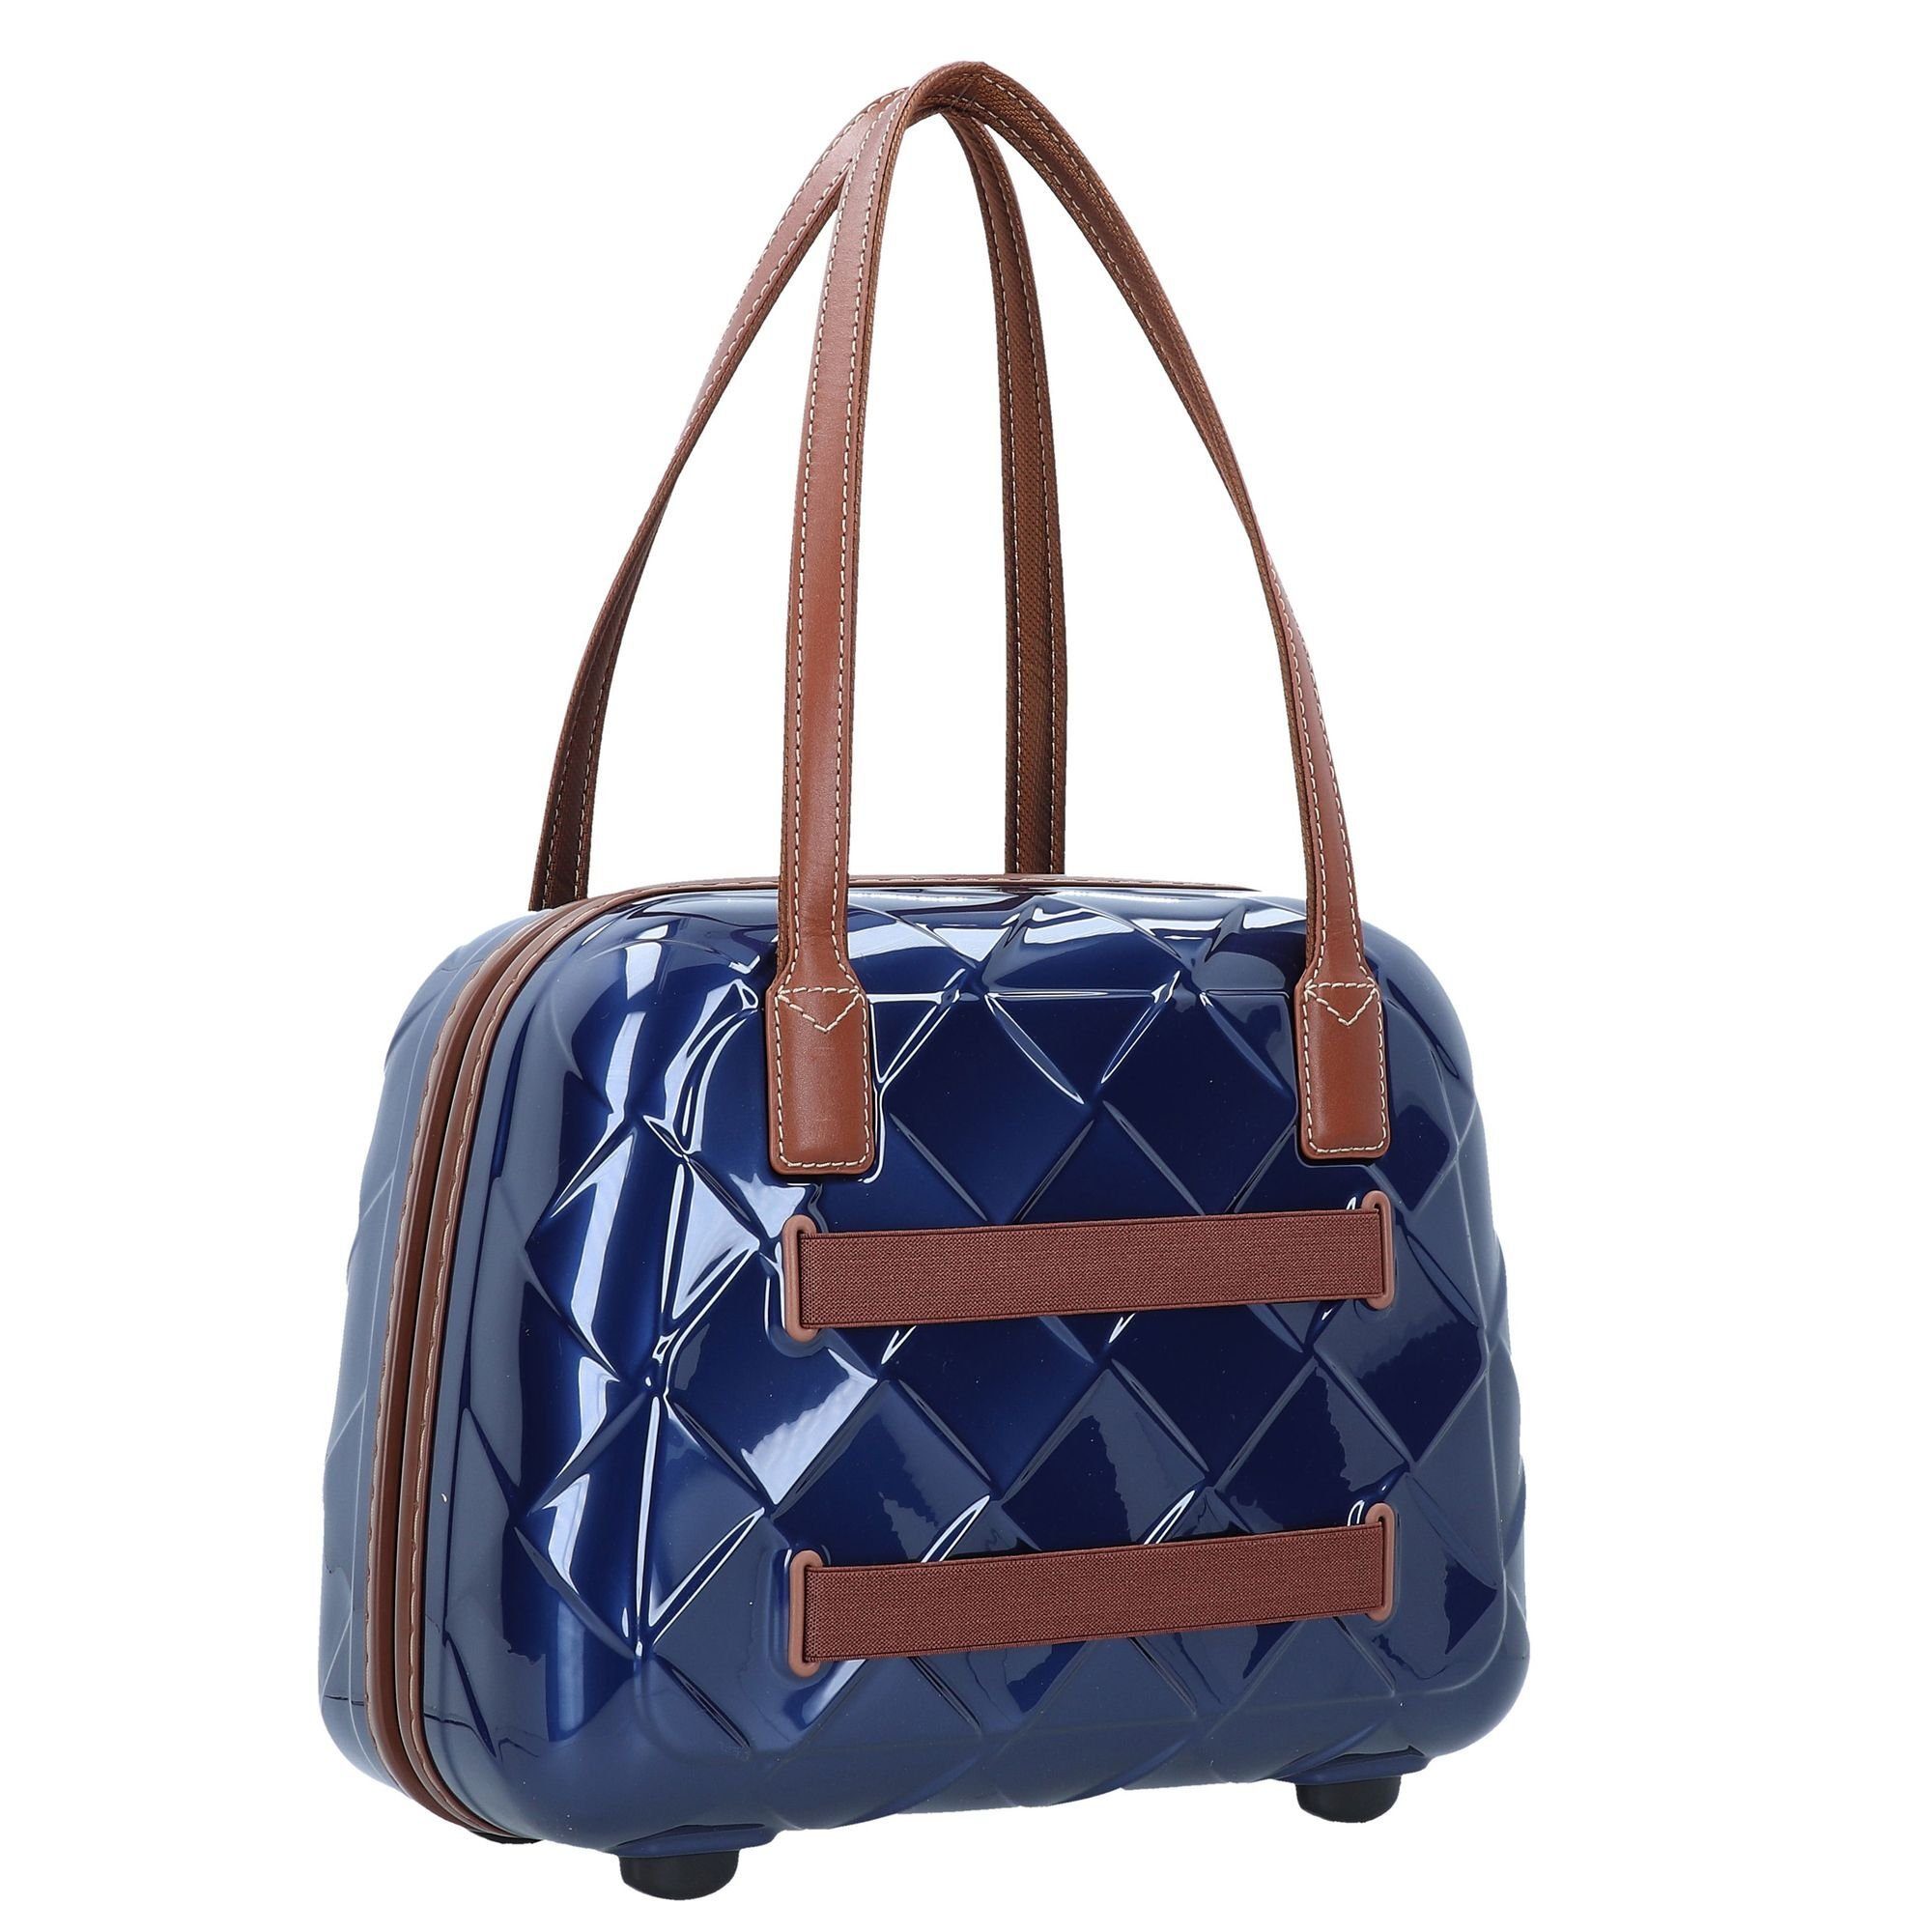 Stratic & Polycarbonat Leather More, Beautycase blau